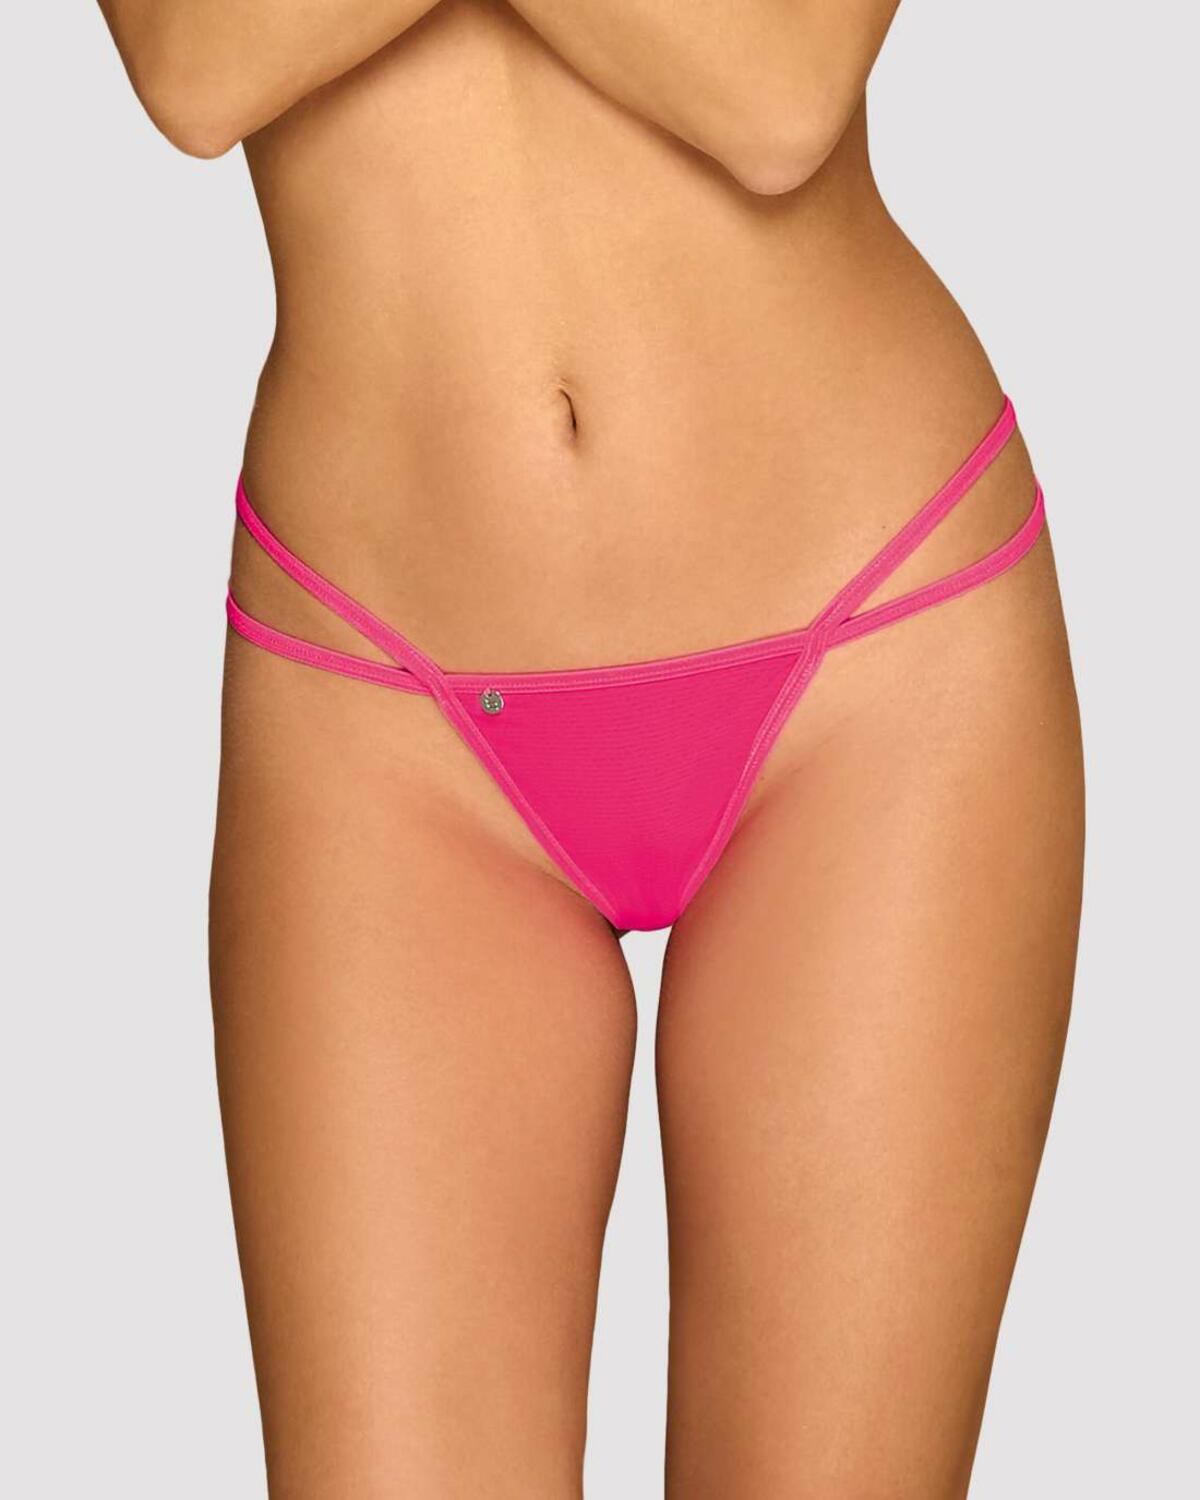 https://ciam.quantico.express/shared/ciam/public/images/prod/1200x/chainty-pink-thong-with-a-chain.jpg